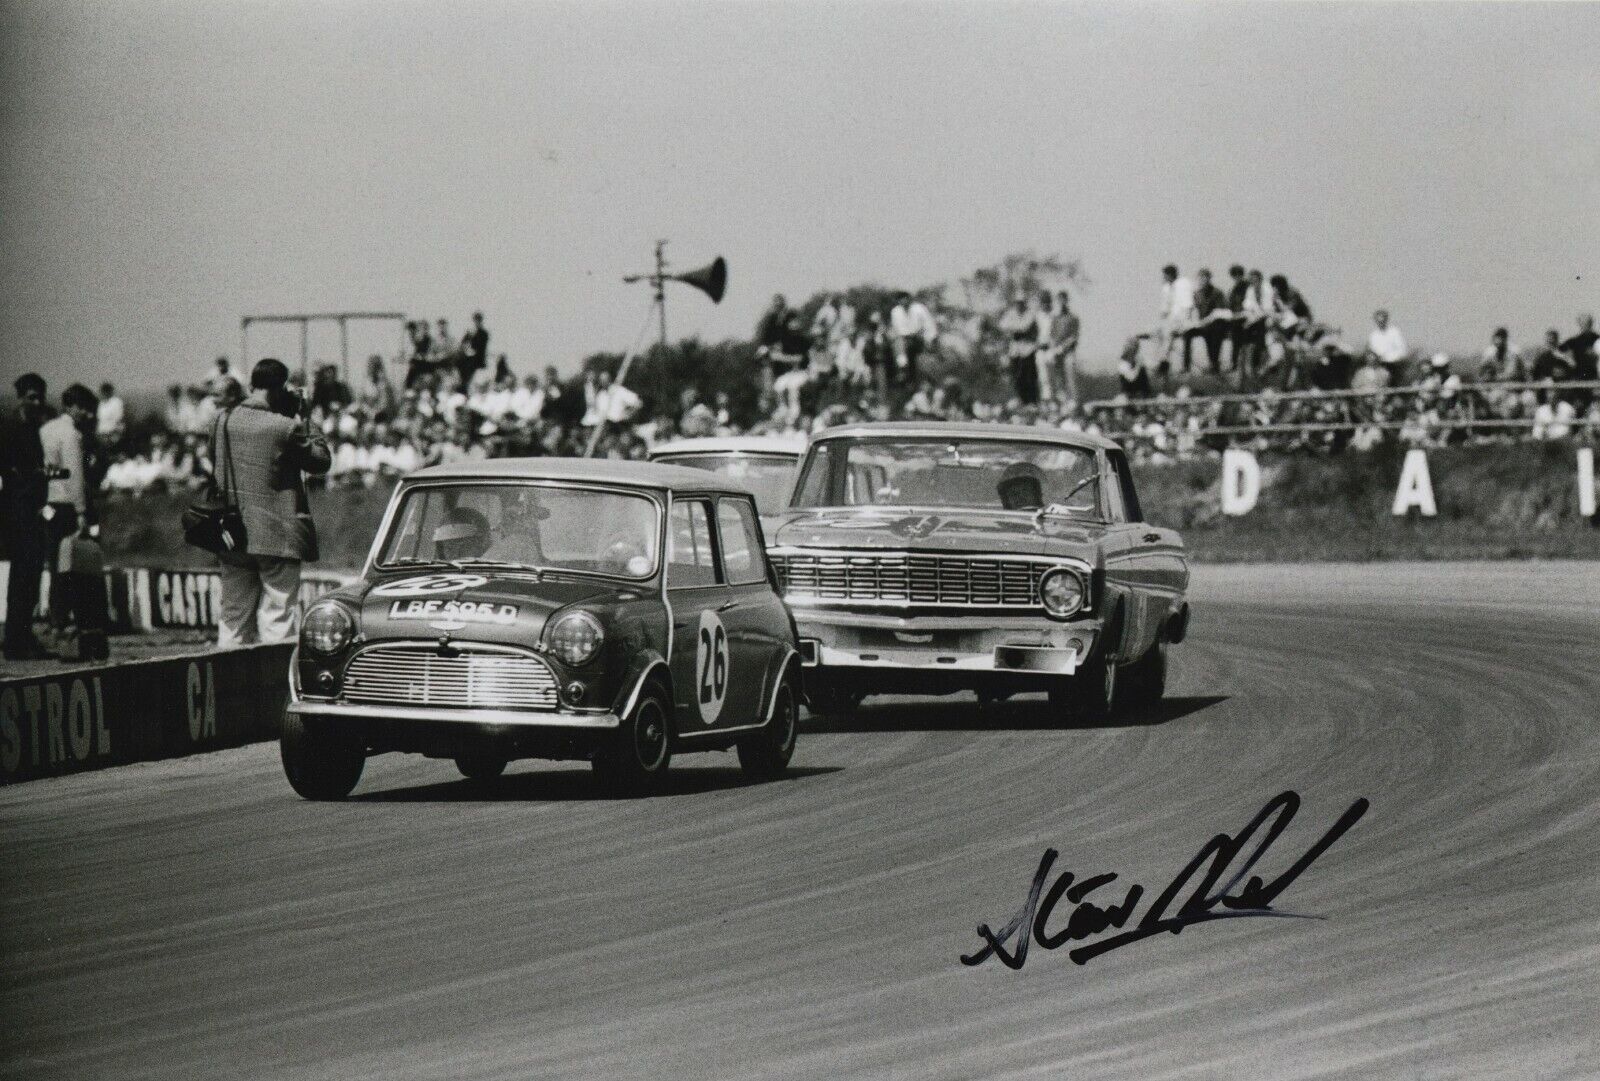 Steve Neal Hand Signed 12x8 Photo Poster painting - Touring Cars Autograph Mini.